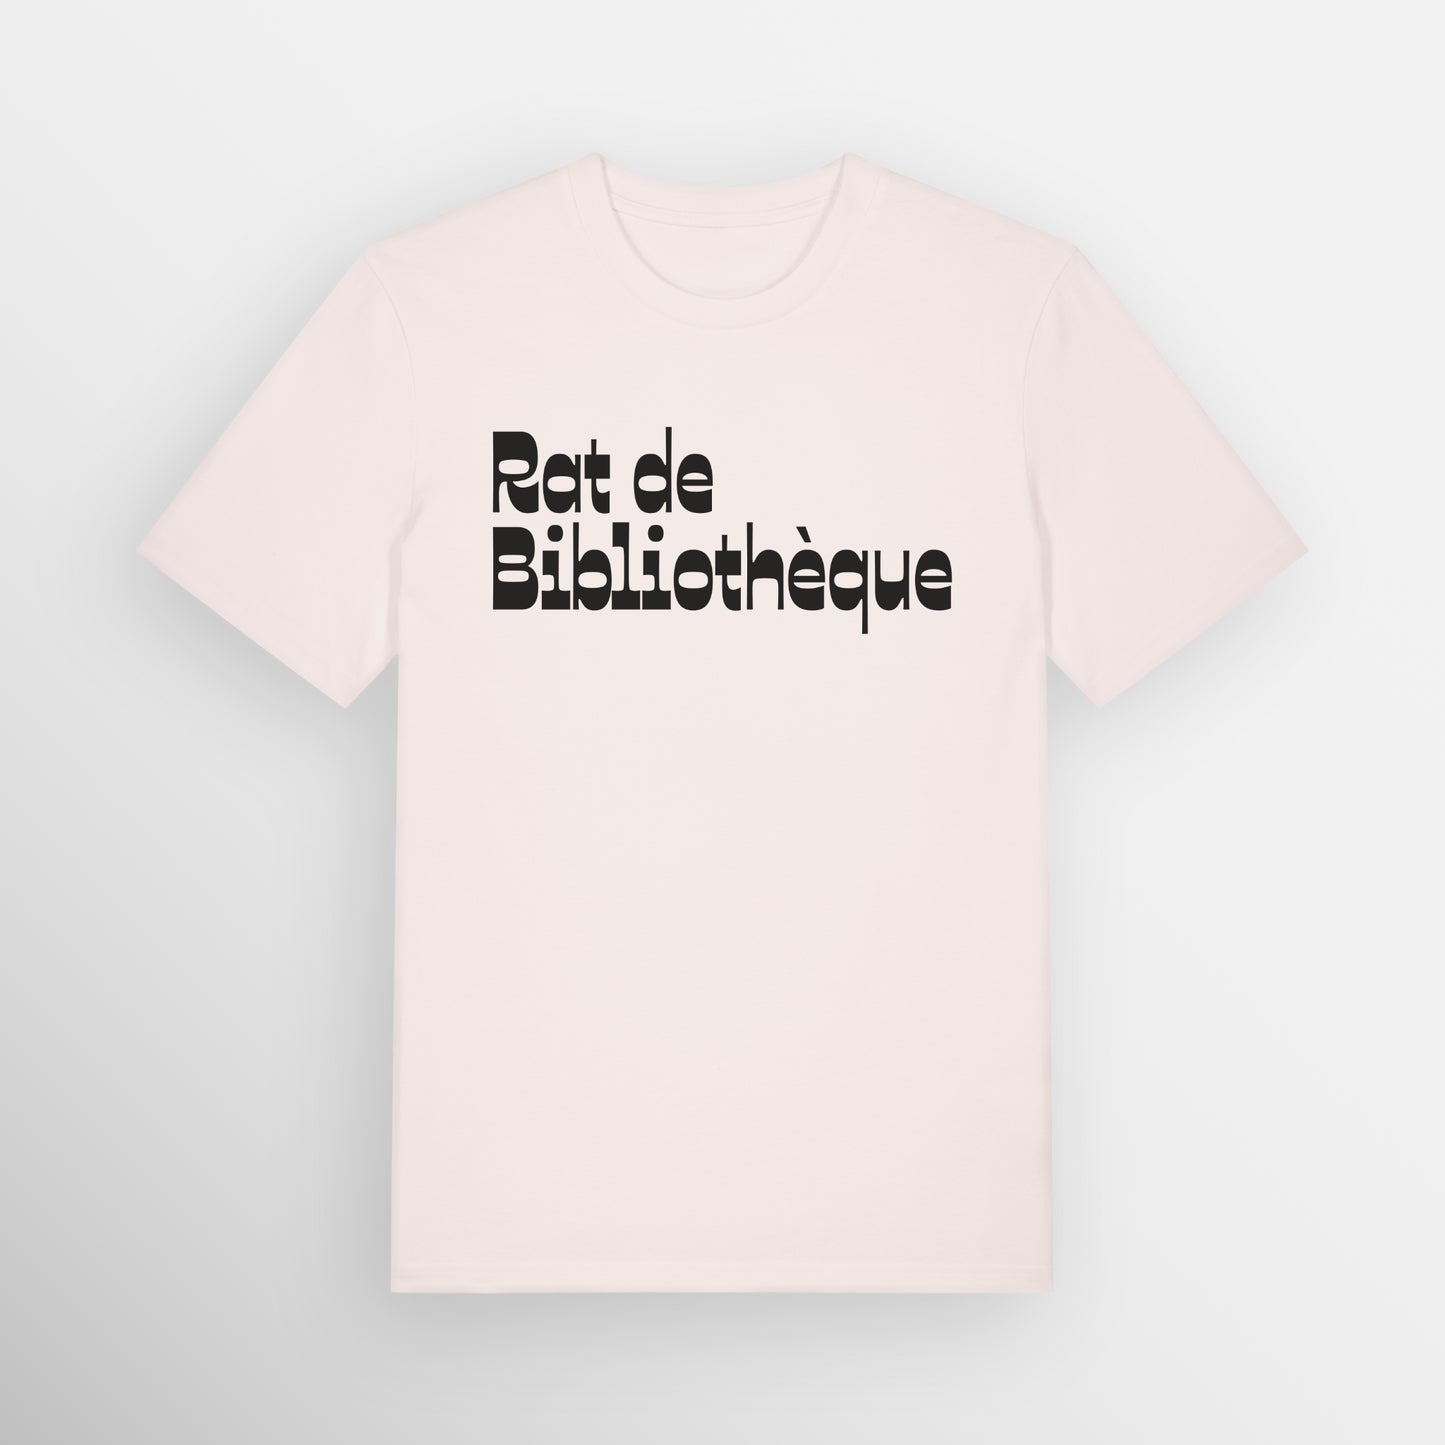 Vintage White coloured regular fit t-shirt with Rat de Bibliothèque written on the front in black, which is French for bookworm.